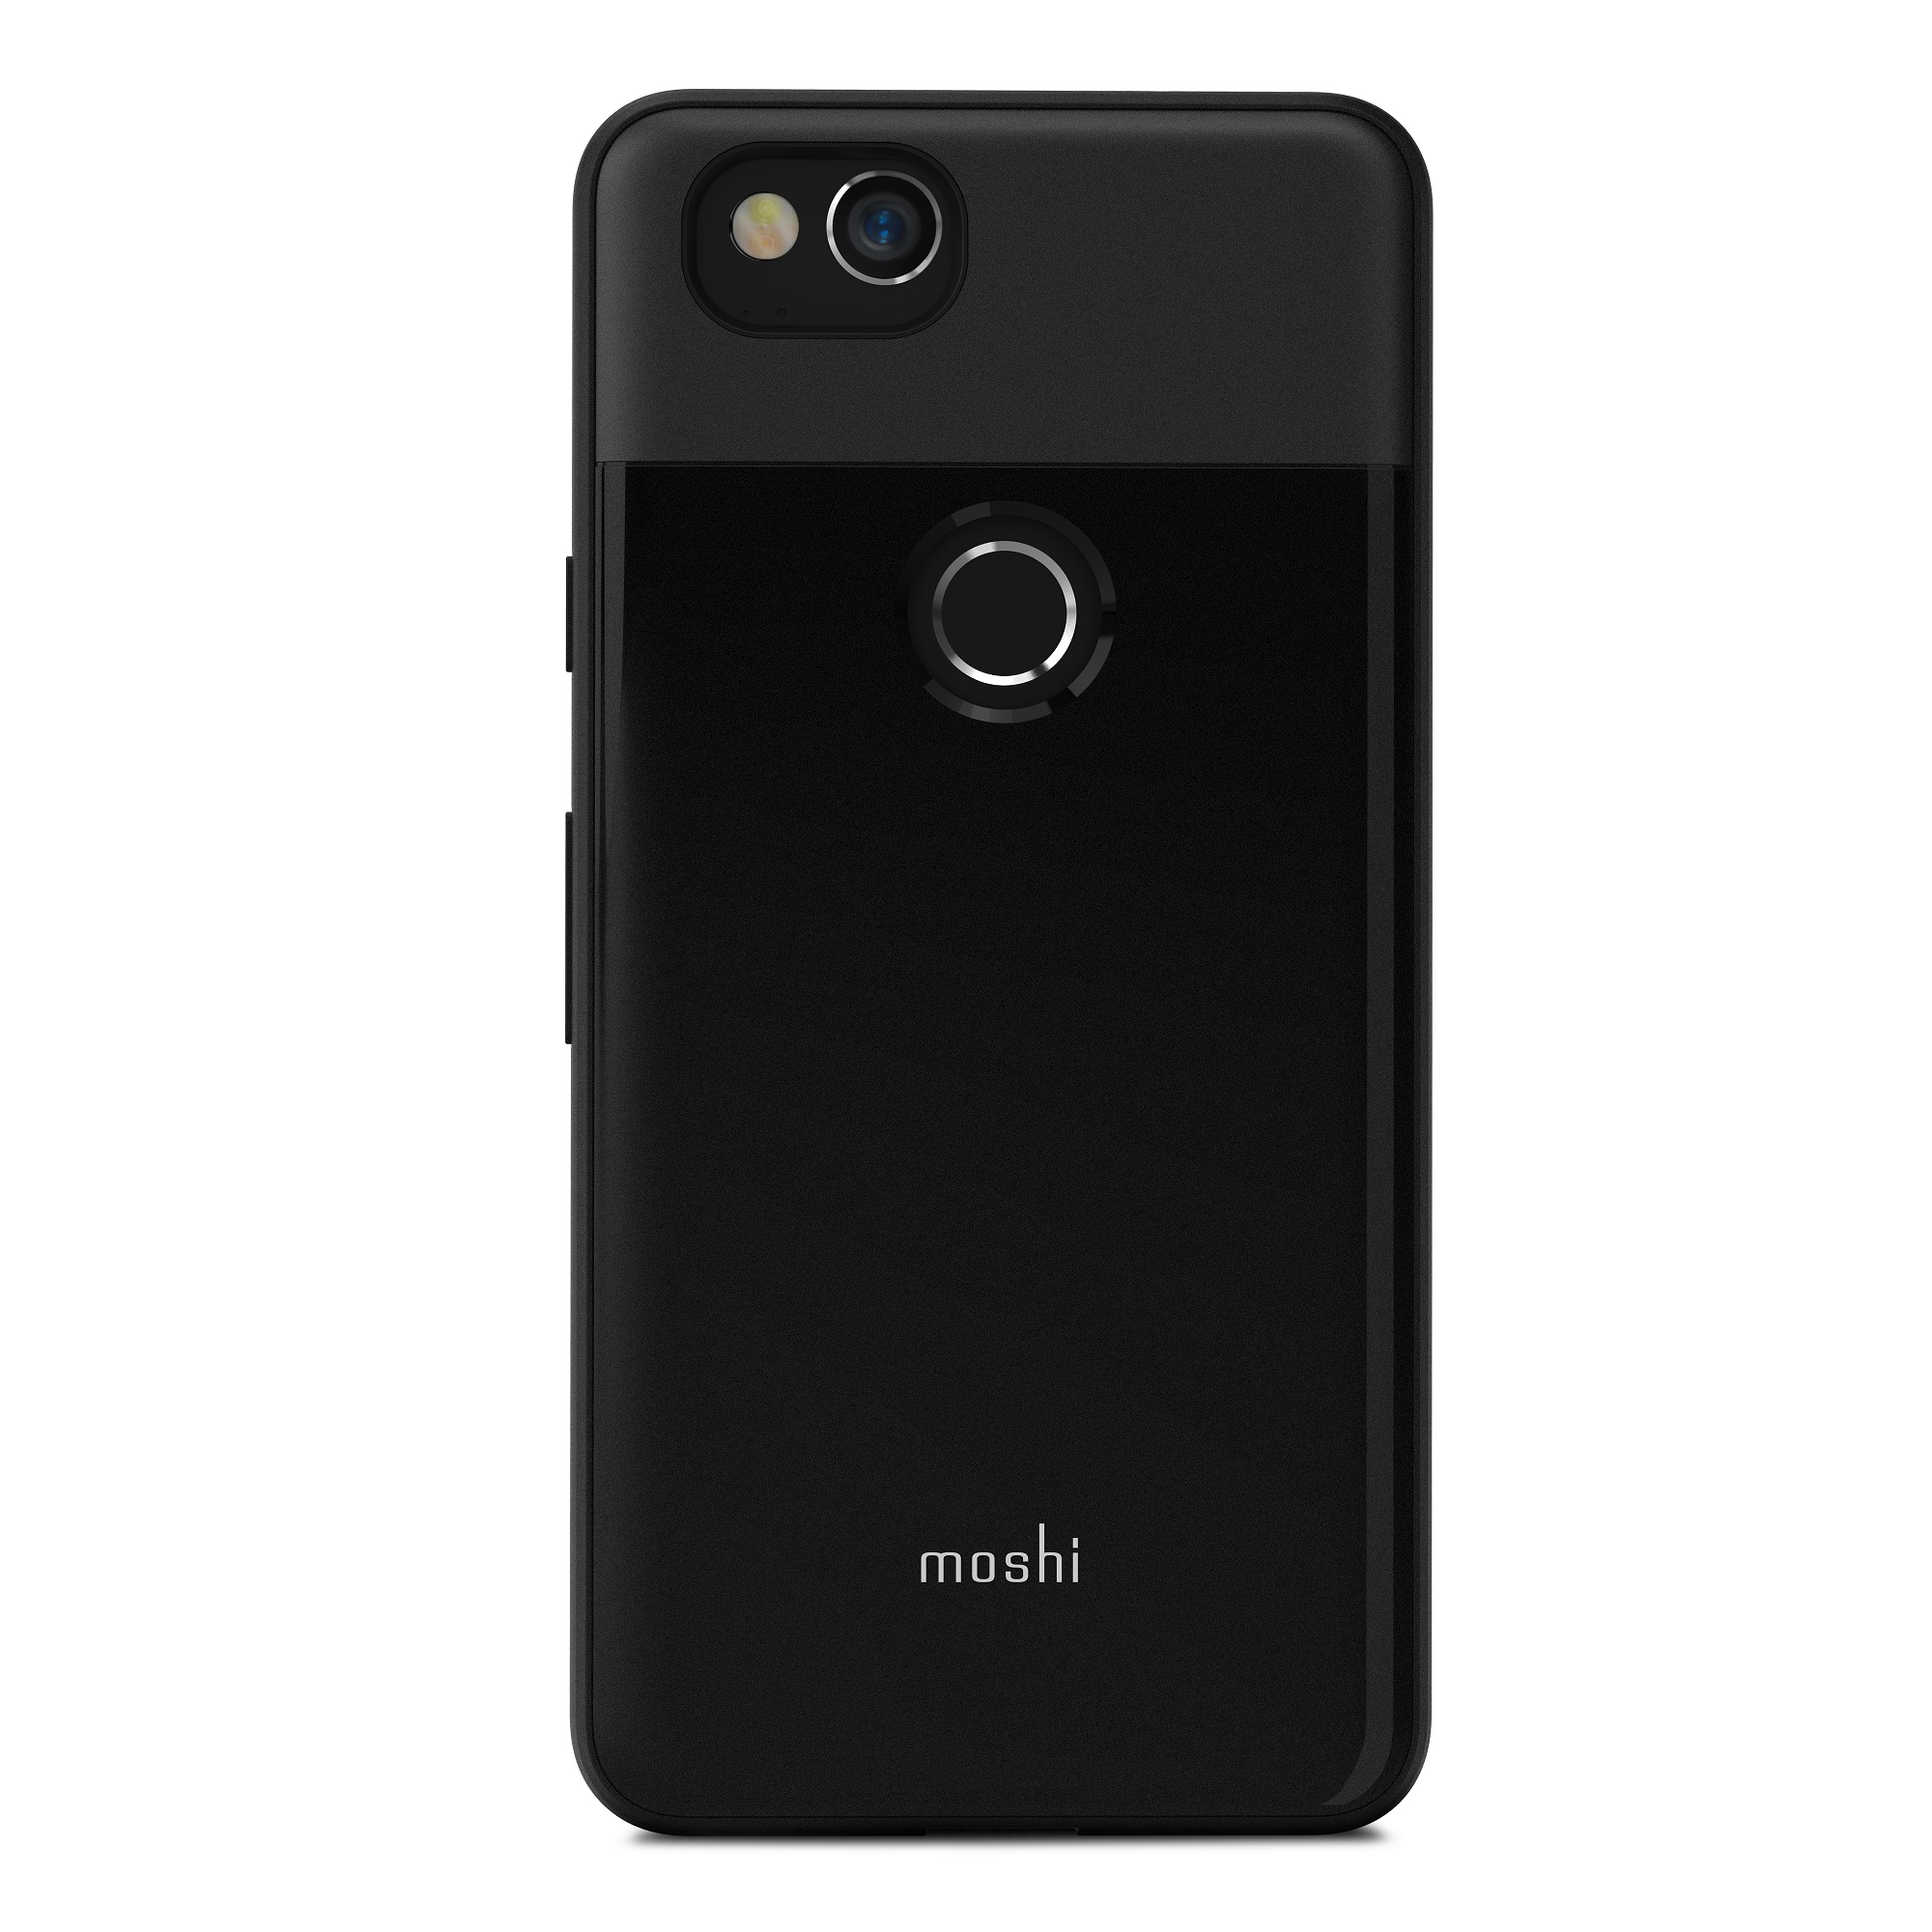 Moshi Tycho Case for Google Pixel 2